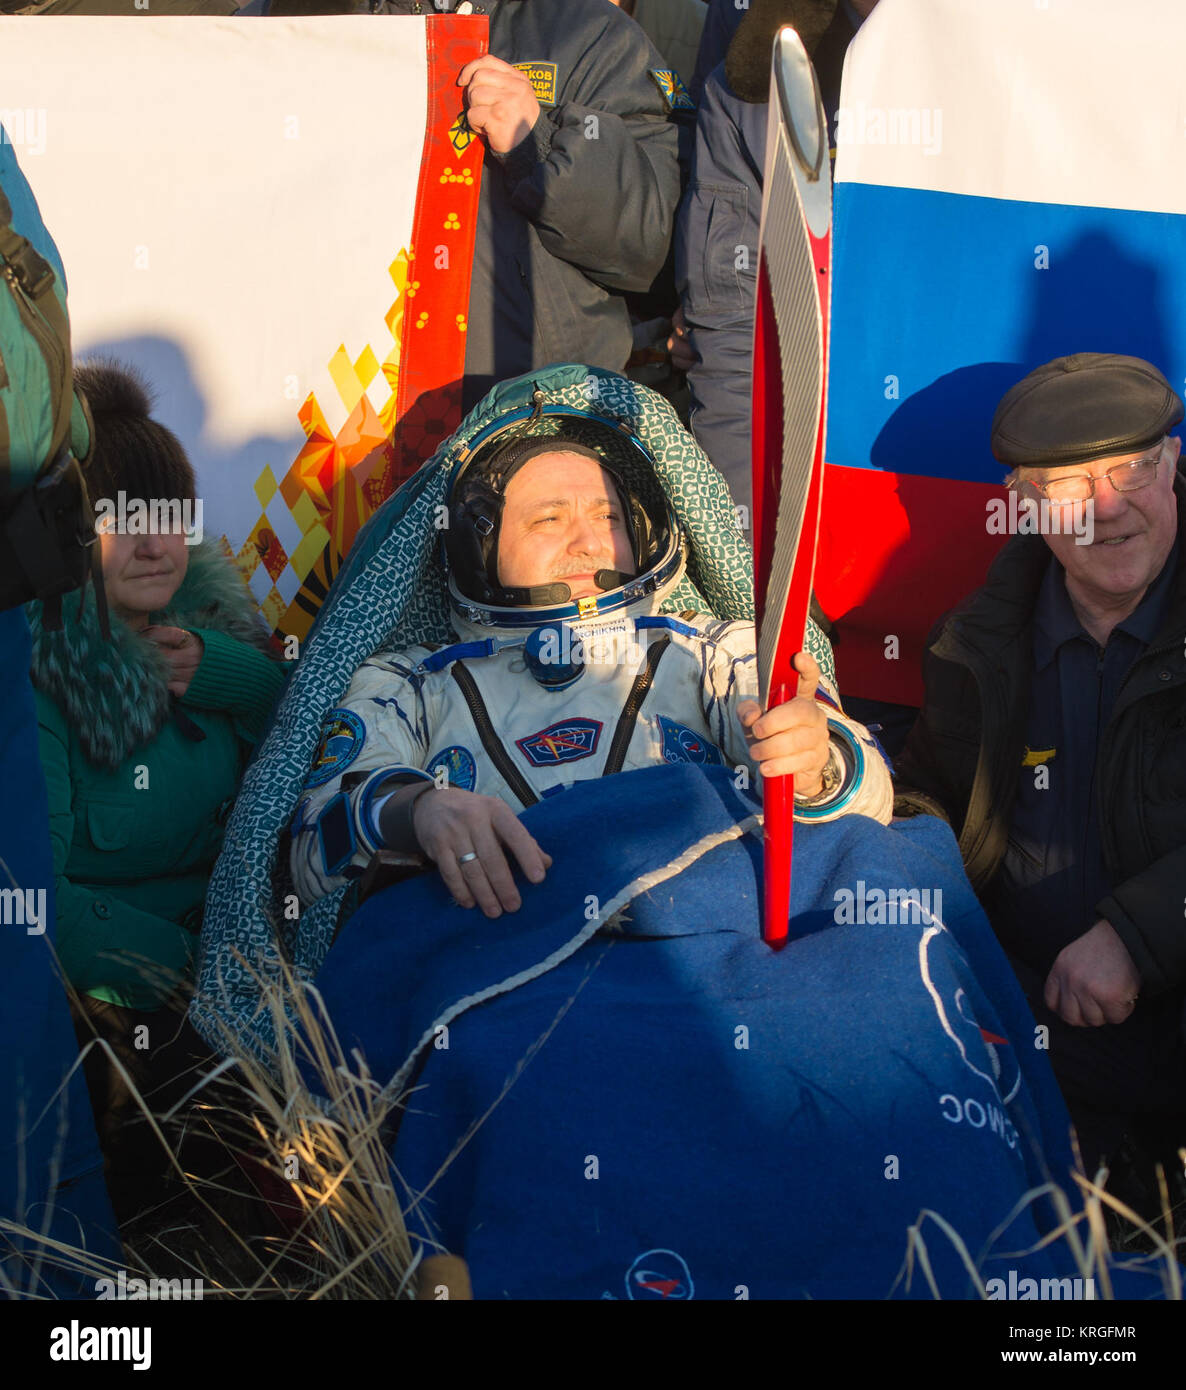 Expedition 37 Commander Fyodor Yurchikhin is seen holding the Olympic torch minutes after he and his crew landed in a remote area southeast of the town of Zhezkazgan, Kazakhstan, on Monday, Nov. 11, 2013.  The Olympic torch was launched with the crew of Expedition 38 to the International Space Station on November 7.  It was passed from one module to the next and had its first spacewalk on November 9 with two Russian cosmonauts as part of its international relay.  Now back on earth it will continue its journey to Sochi, Russia for the 2014 Winter Games.  Photo Credit: (NASA/Carla Cioffi) Soyuz  Stock Photo